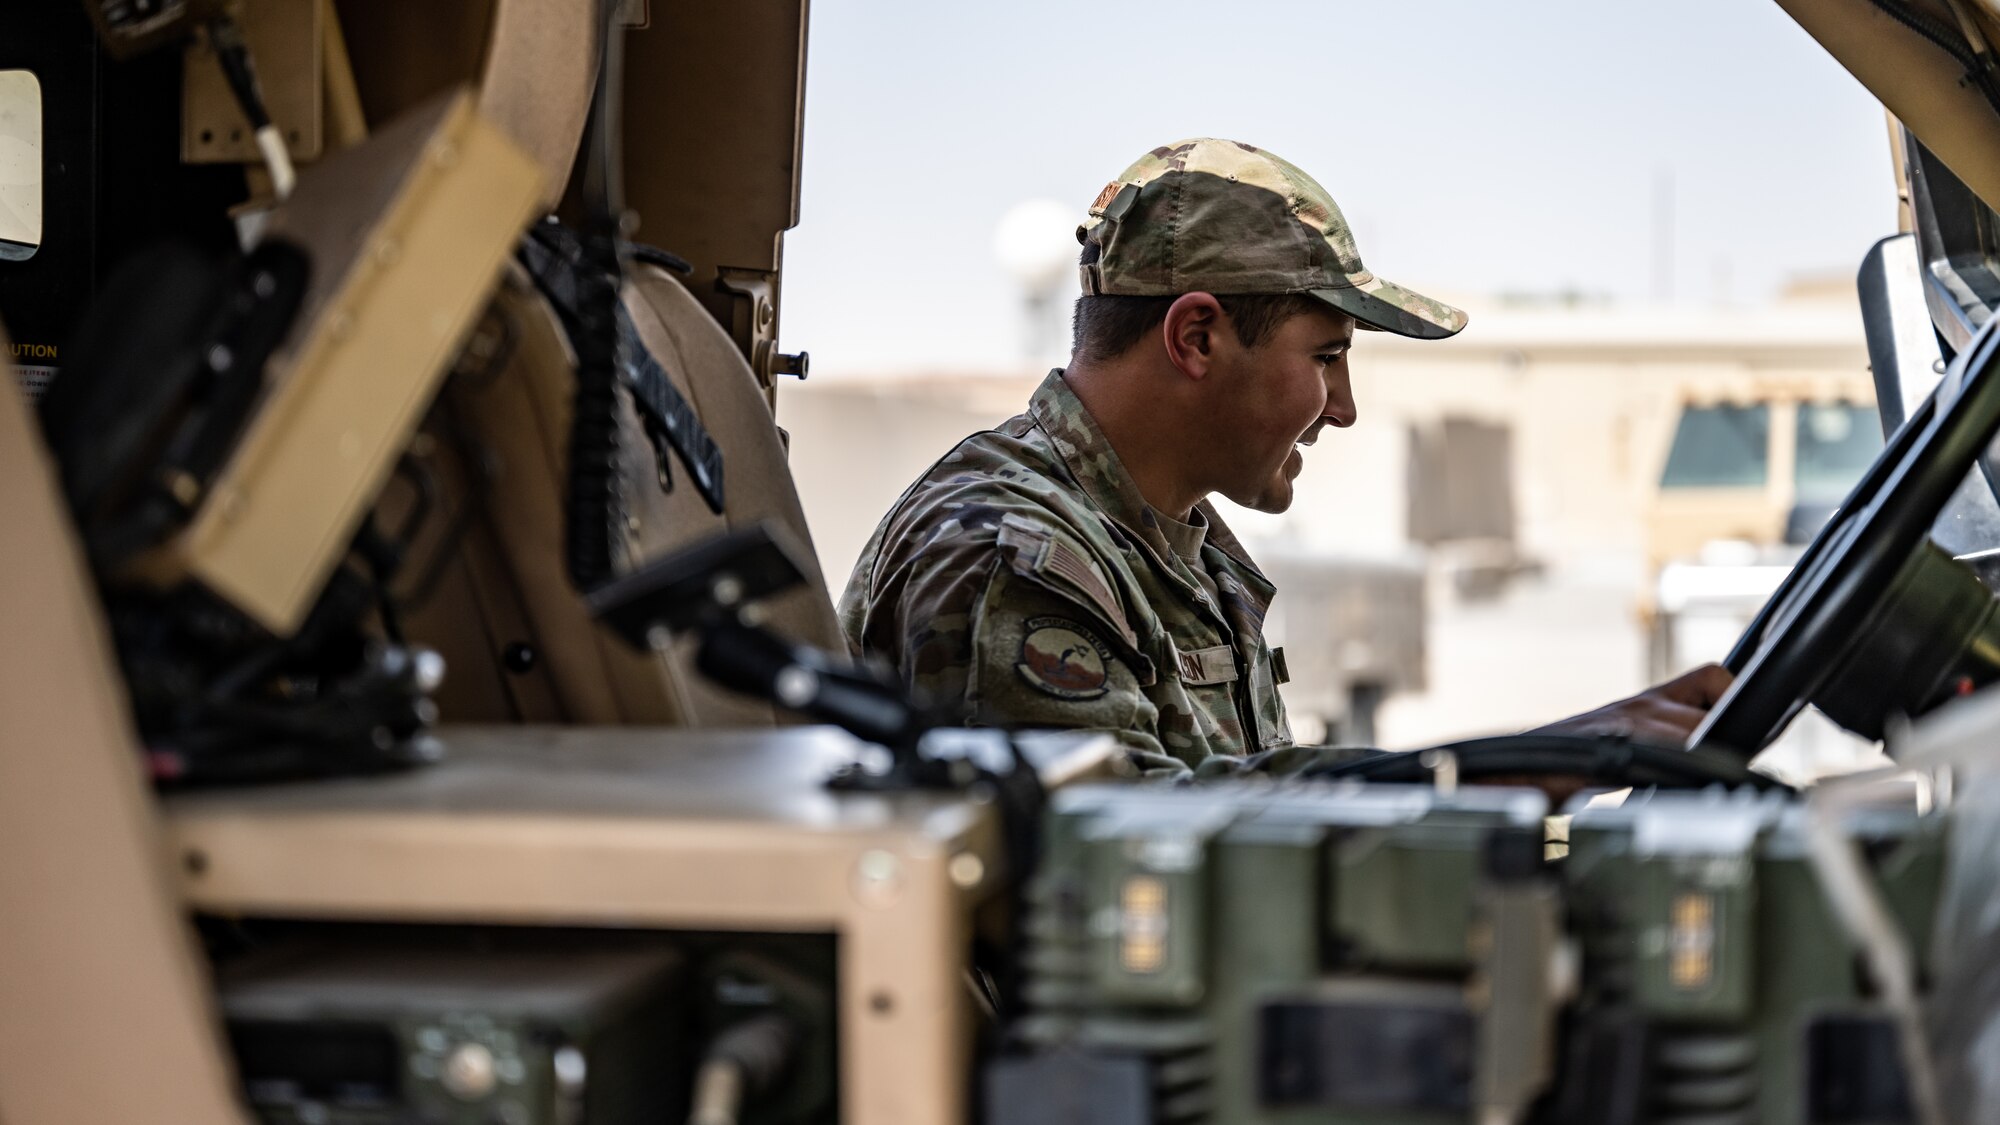 U.S. Air Force Staff Sgt. Bailey Paxson, 386th Expeditionary Security Forces Squadron vehicle control officer, talks to 386th ESFS military working dog handlers about the specs of Mine Resistant Ambush Protected All-Terrain Vehicle (M-ATV) during vehicle familiarity training at Ali Al Salem Air Base, Kuwait, July 13, 2023. The M-ATV is designed to provide the same levels of protection as the larger and heavier vehicles, but with enhanced mobility in the region’s rough terrain. (U.S. Air Force photo by Staff Sgt. Kevin Long)